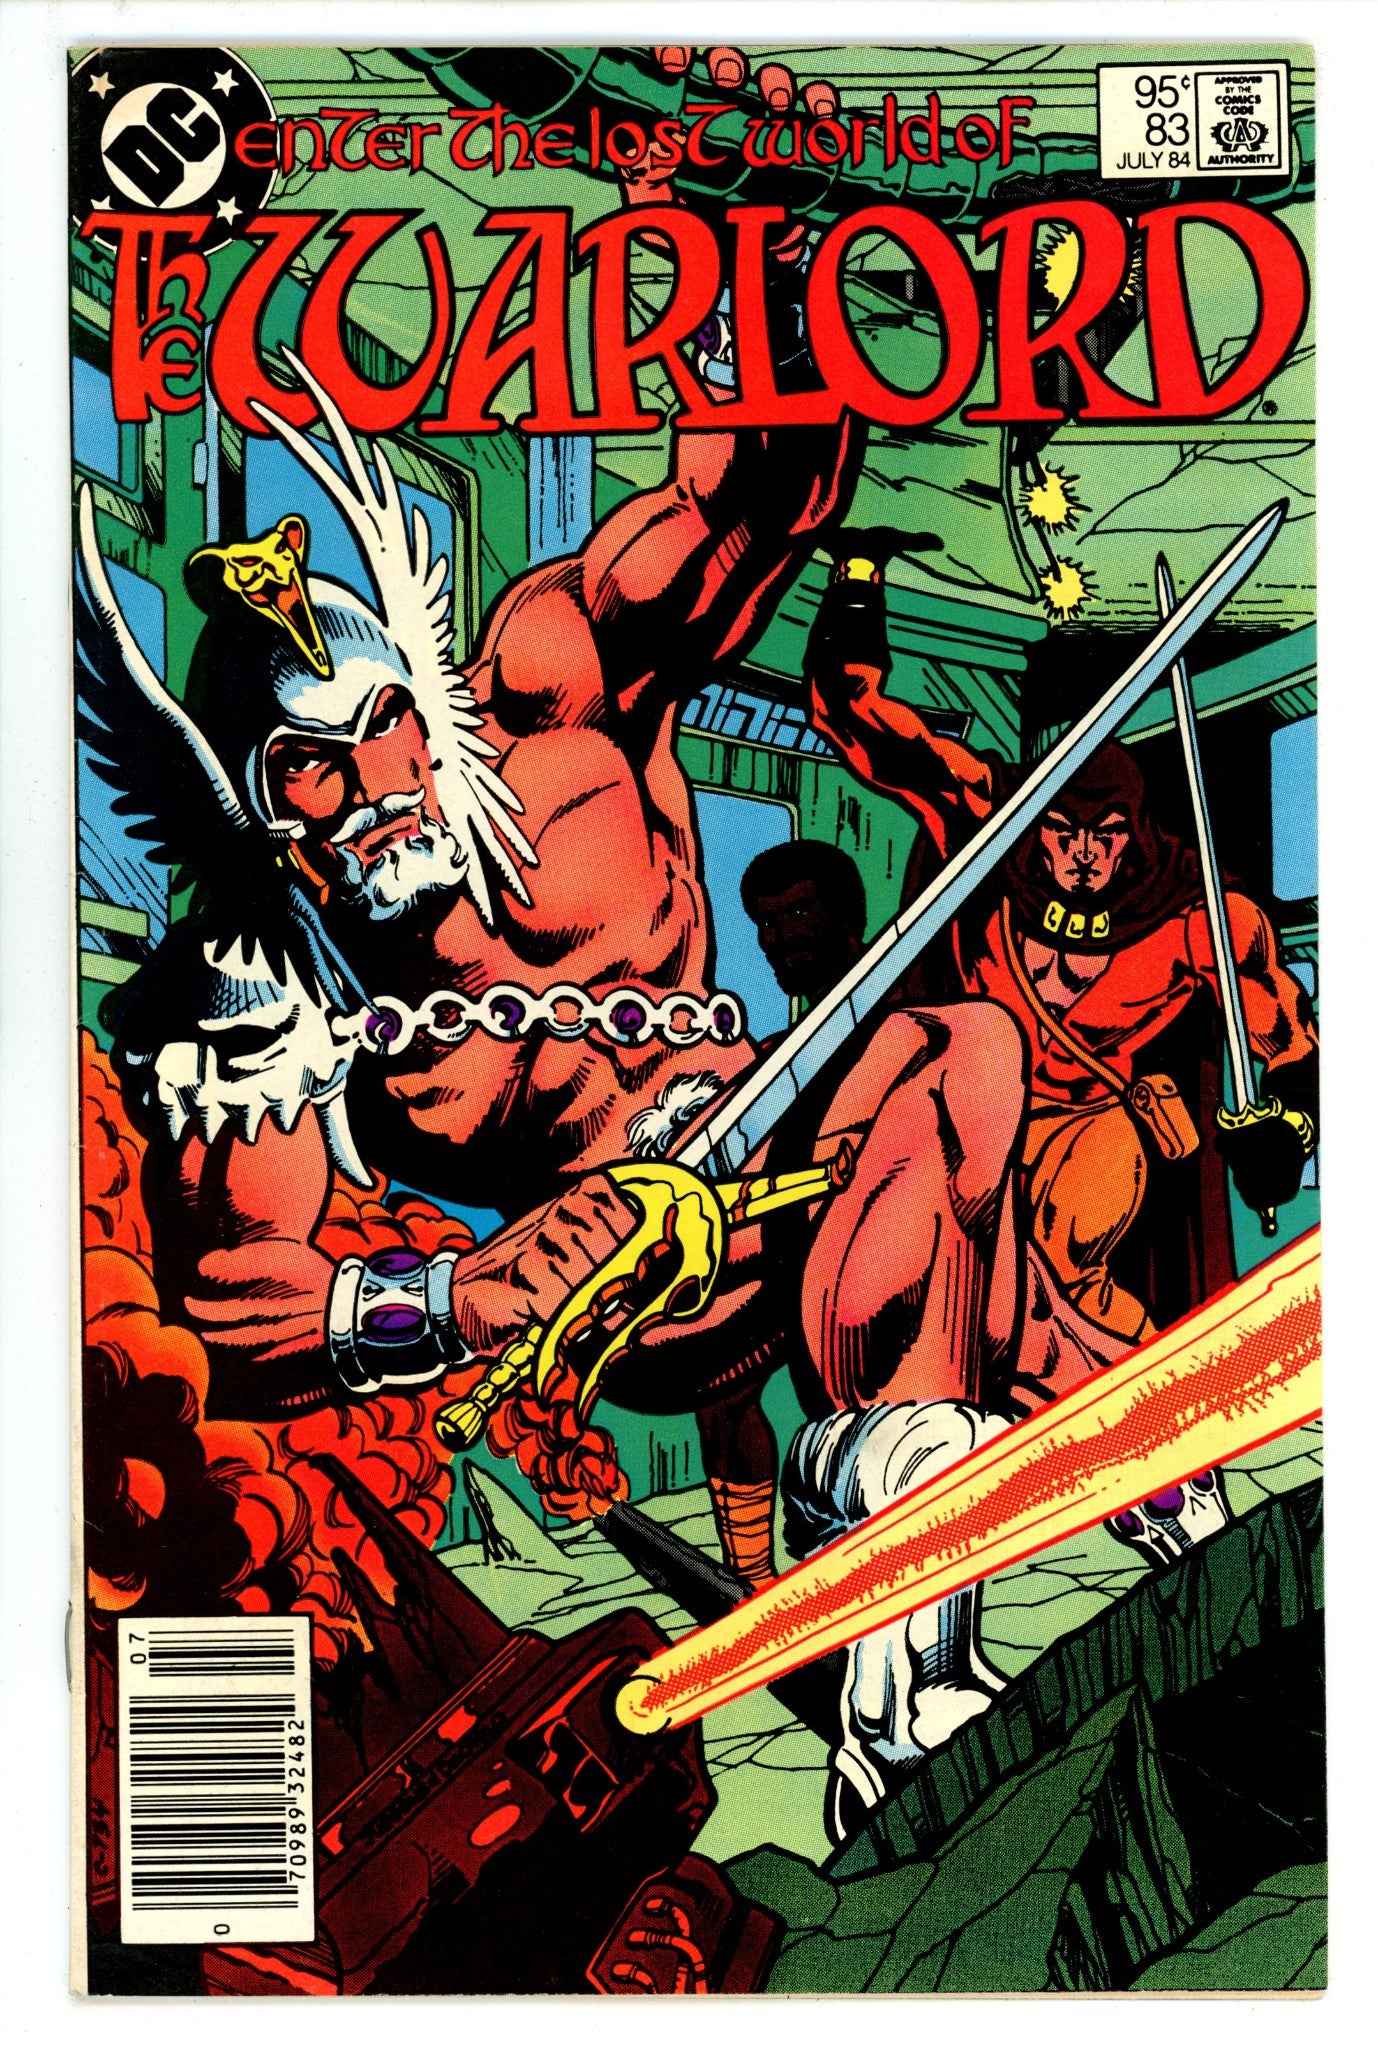 Warlord Vol 1 83 FN+ (6.5) (1984) Canadian Price Variant 